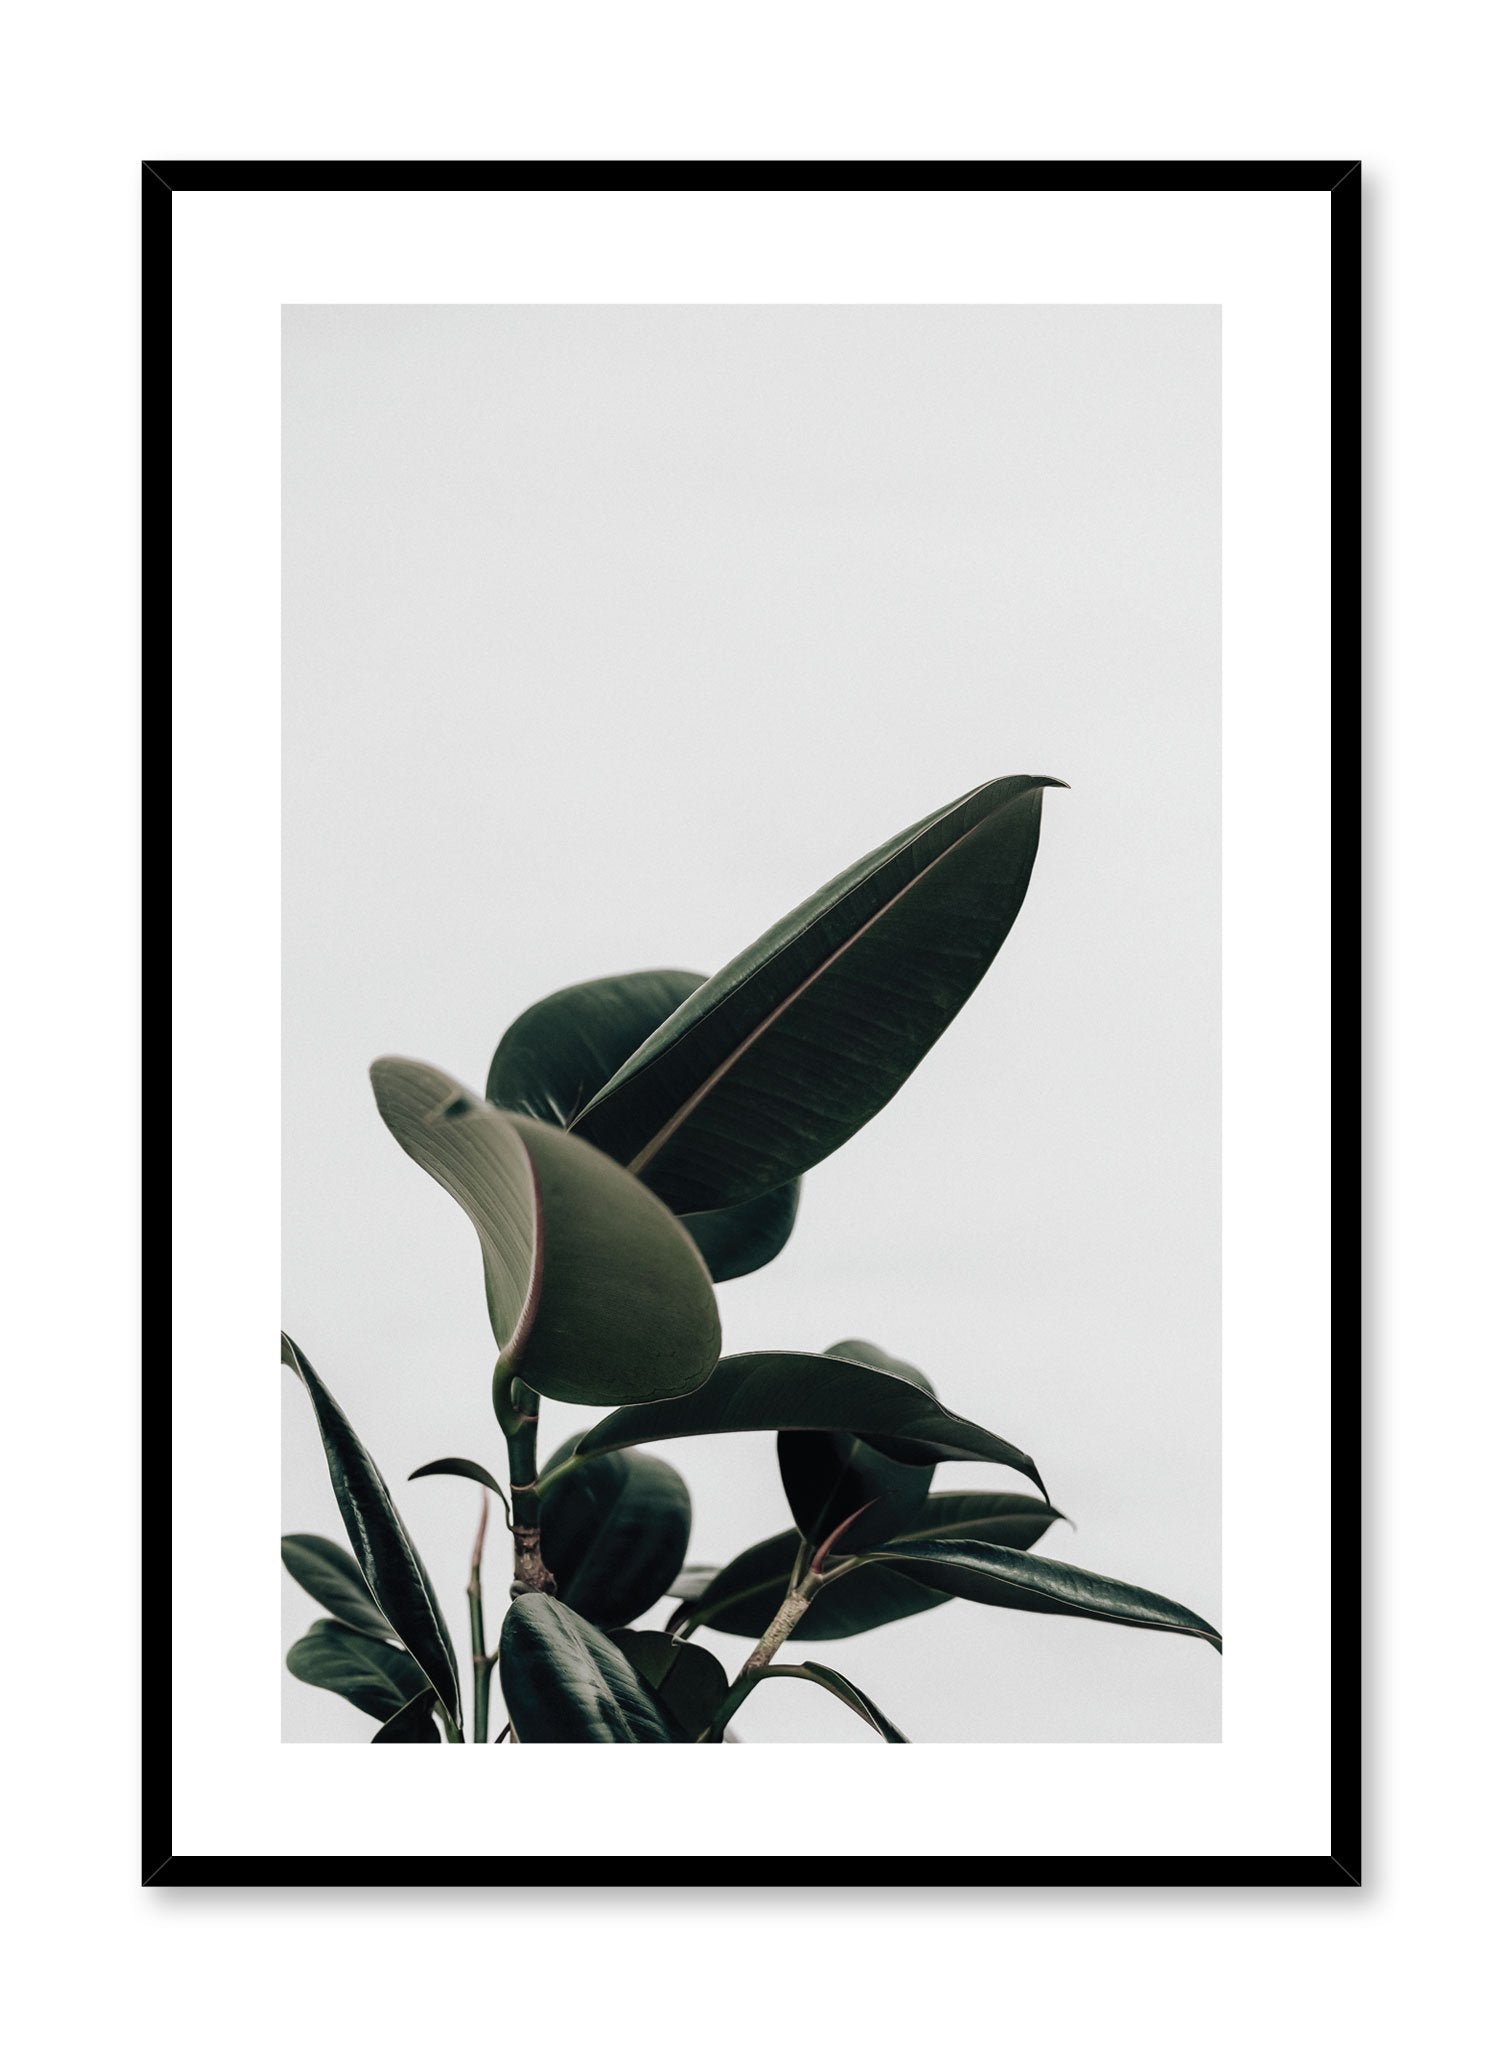 Minimalistic wall poster by Opposite Wall with Ficus rubber elastica botanical photography